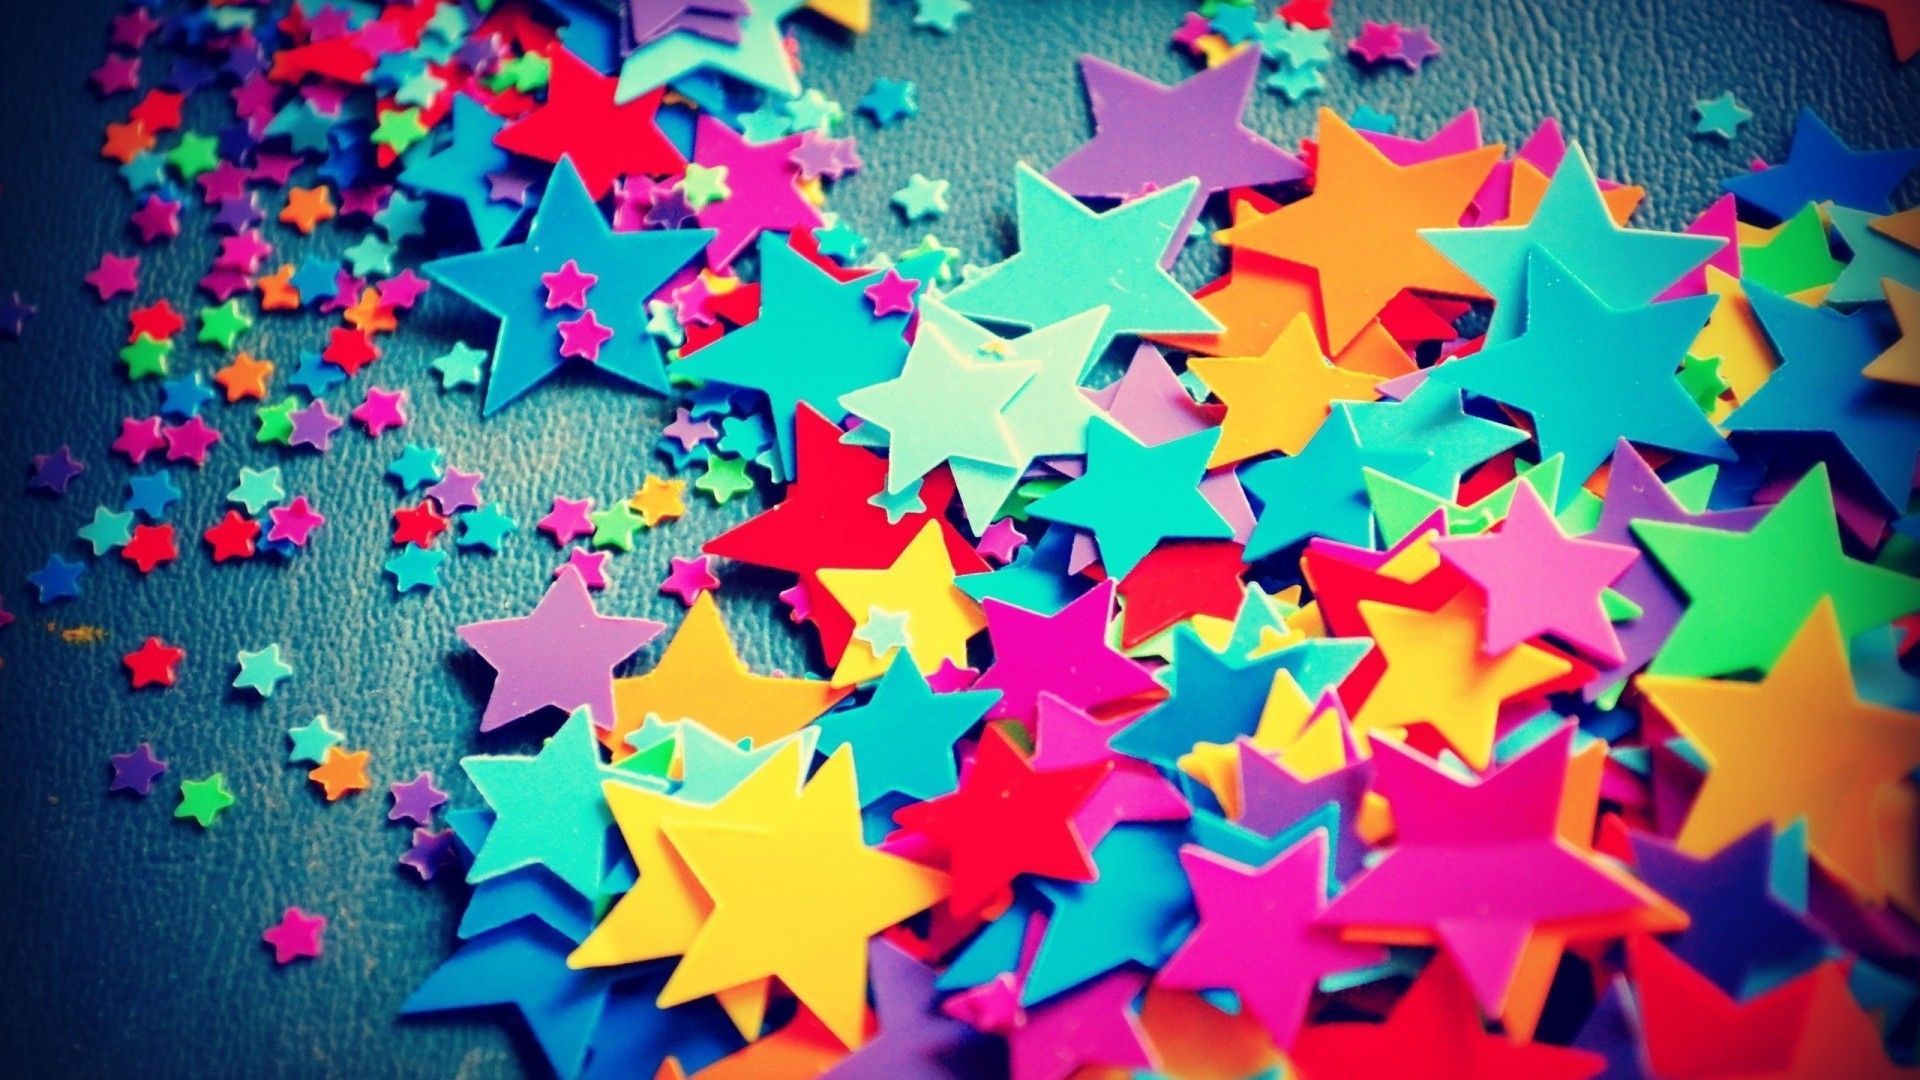 cute wallpapers hd,confetti,jigsaw puzzle,colorfulness,construction paper,art